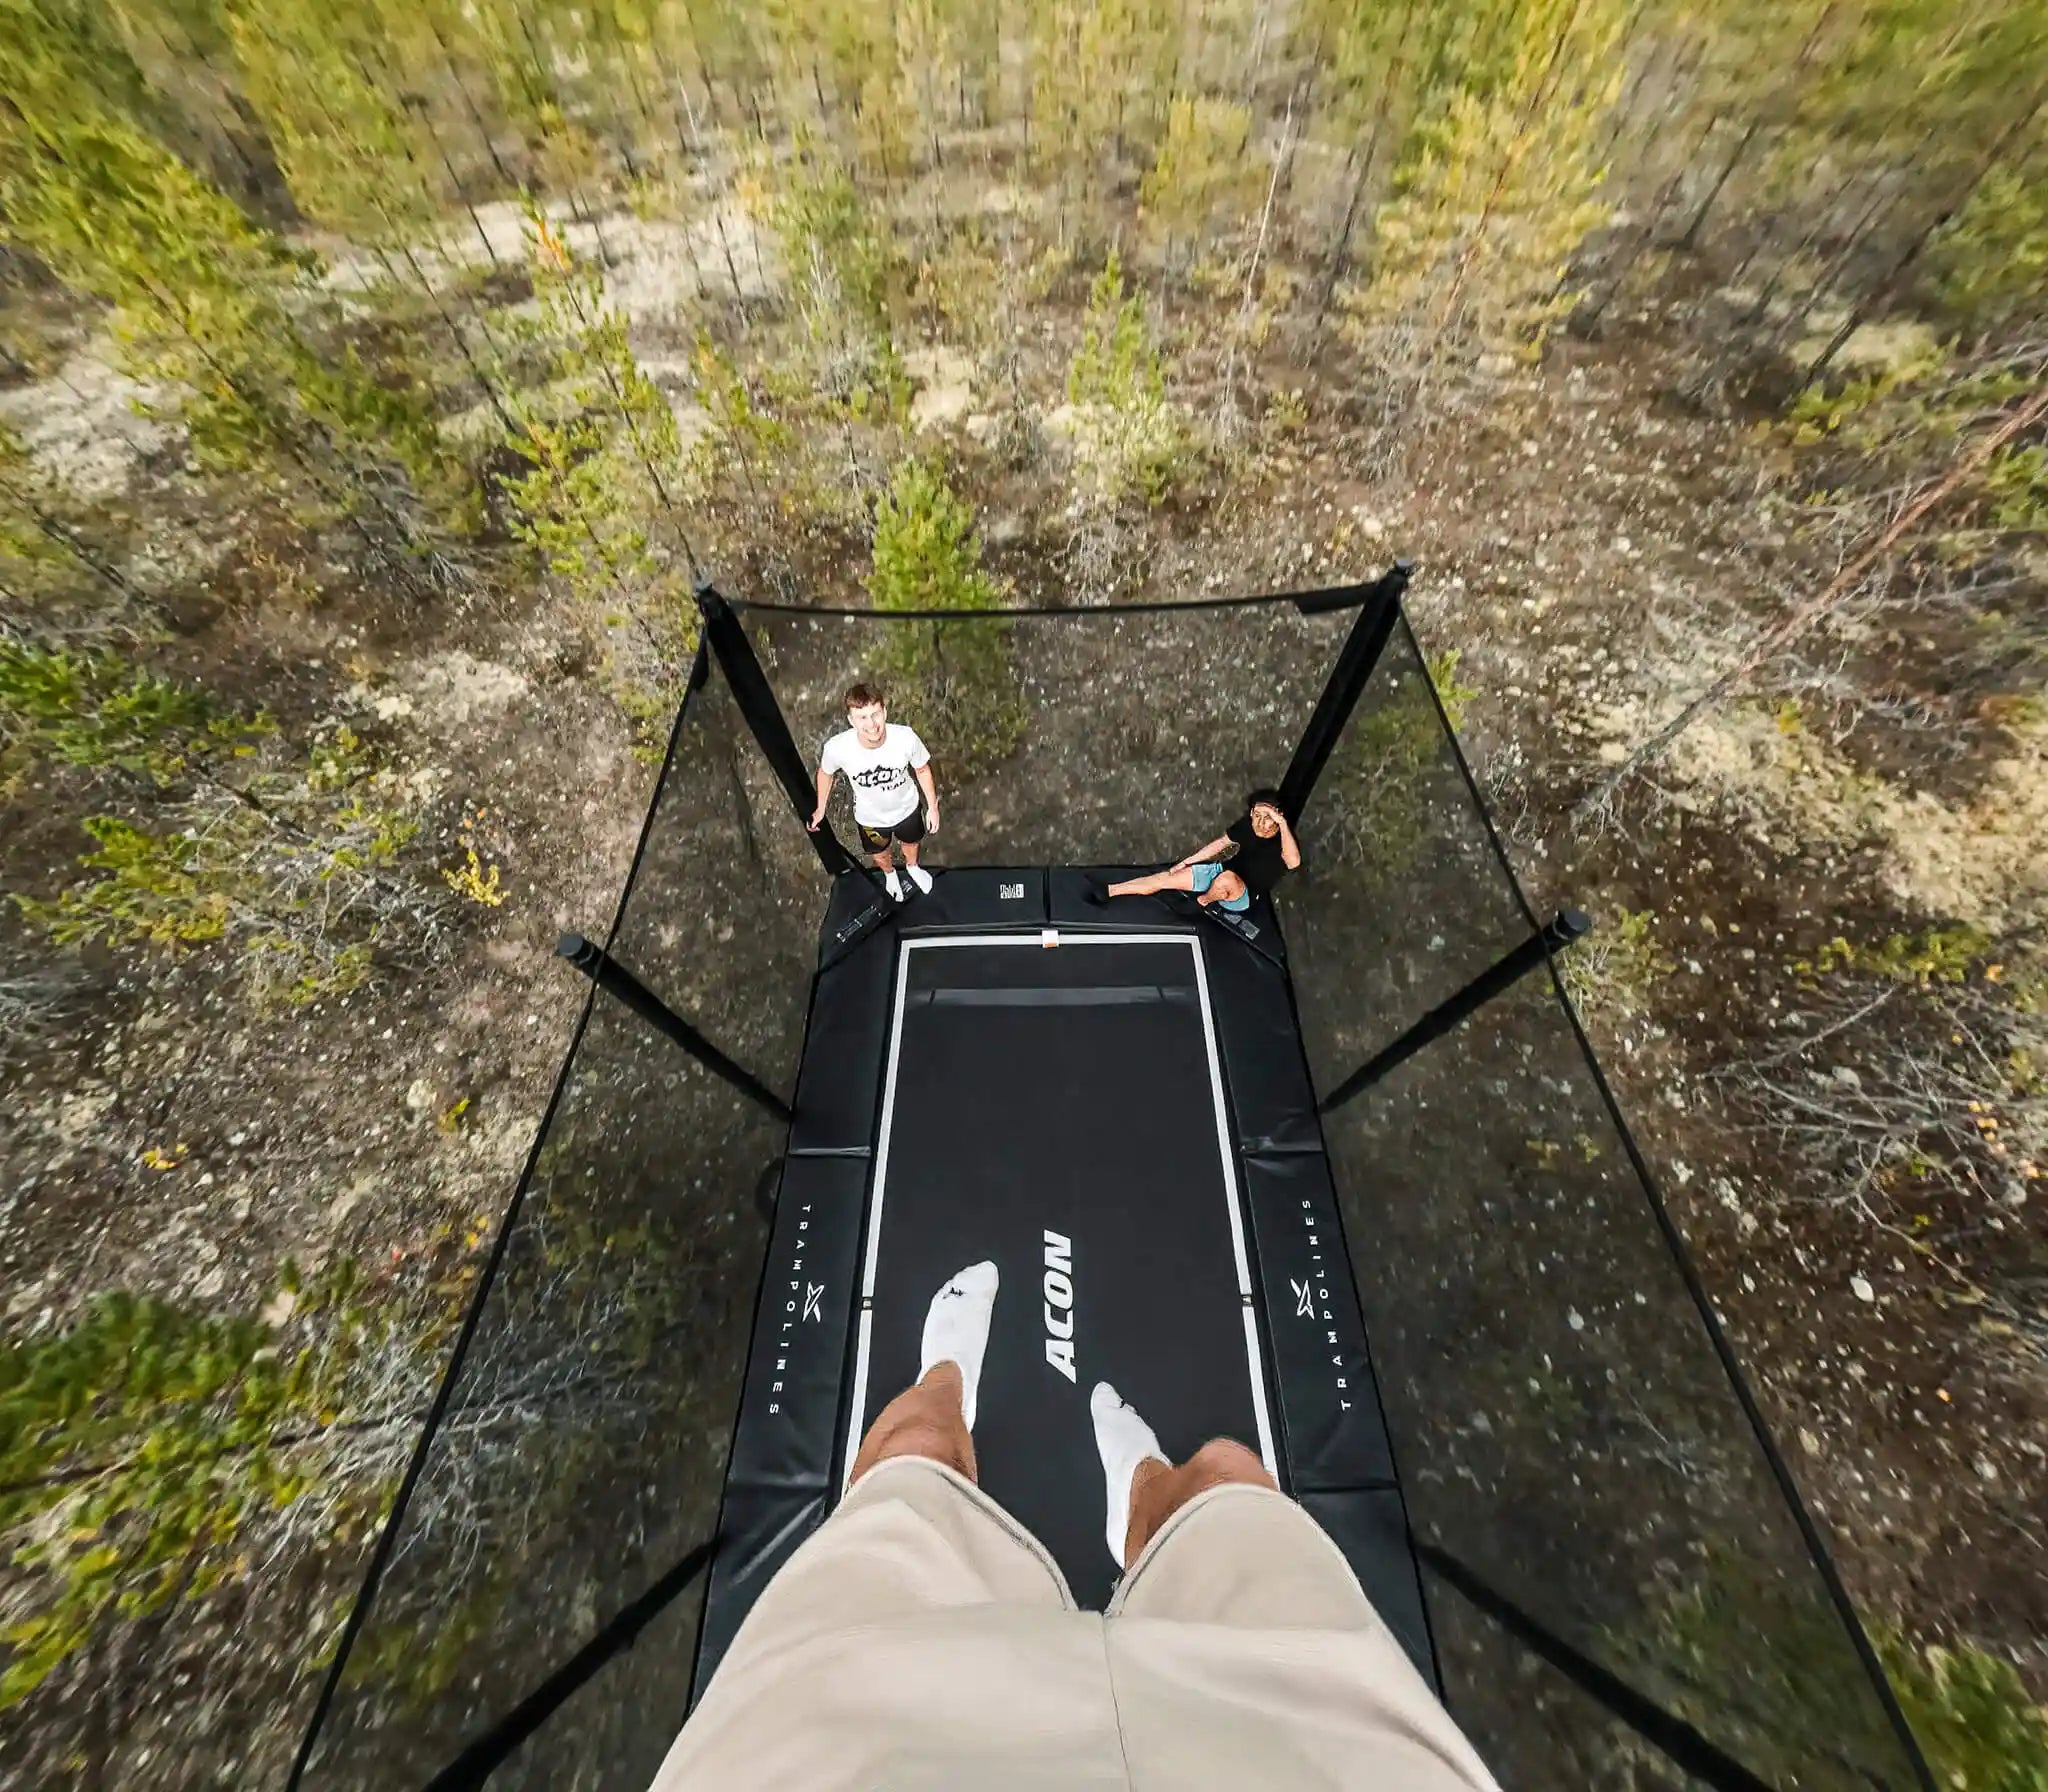 Acon X Trampoline jumper's point of view.